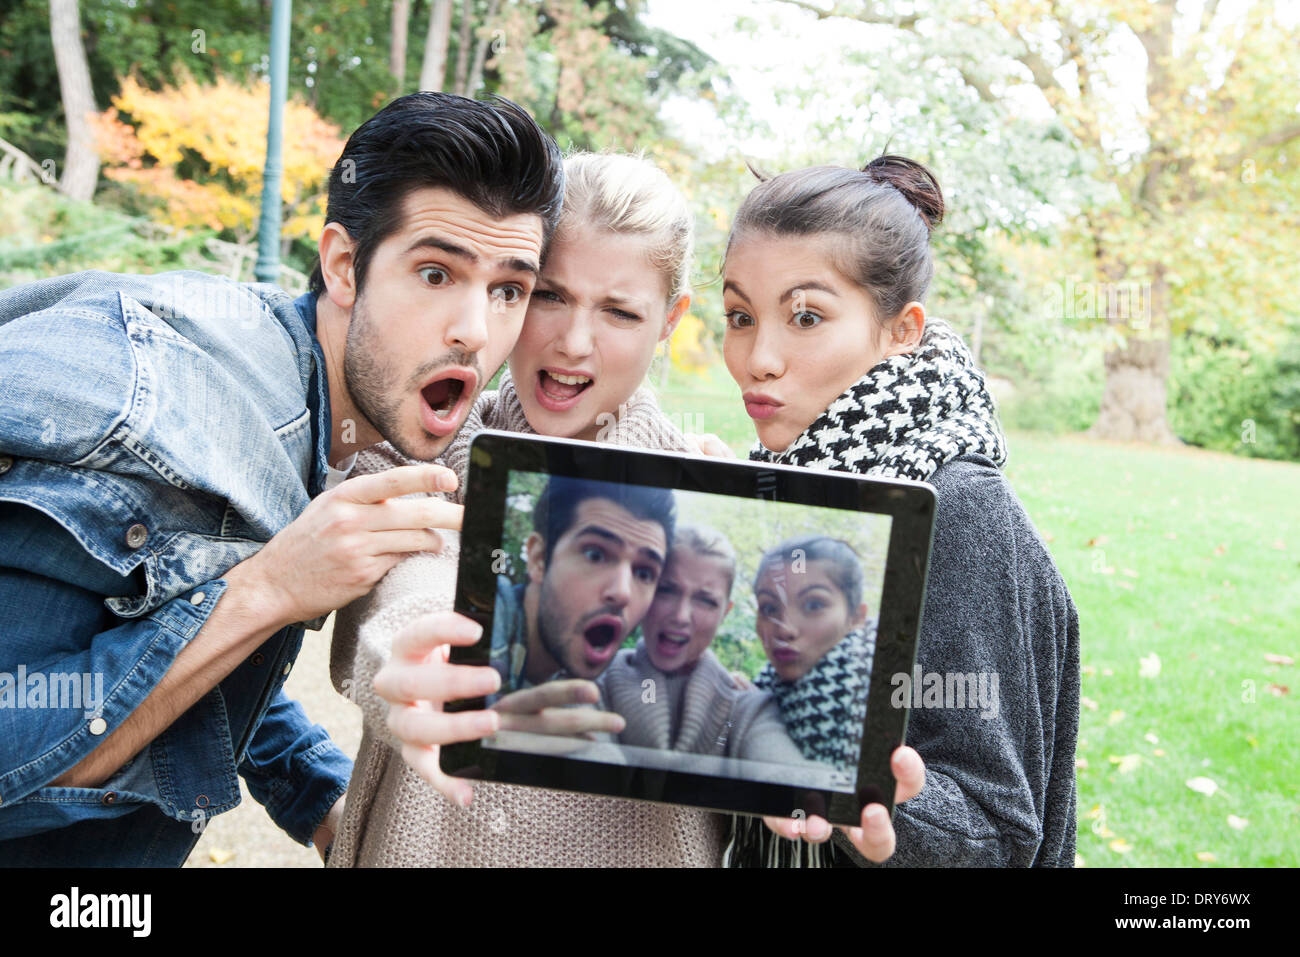 Friends photographing themselves making funny faces with digital tablet outdoors Stock Photo